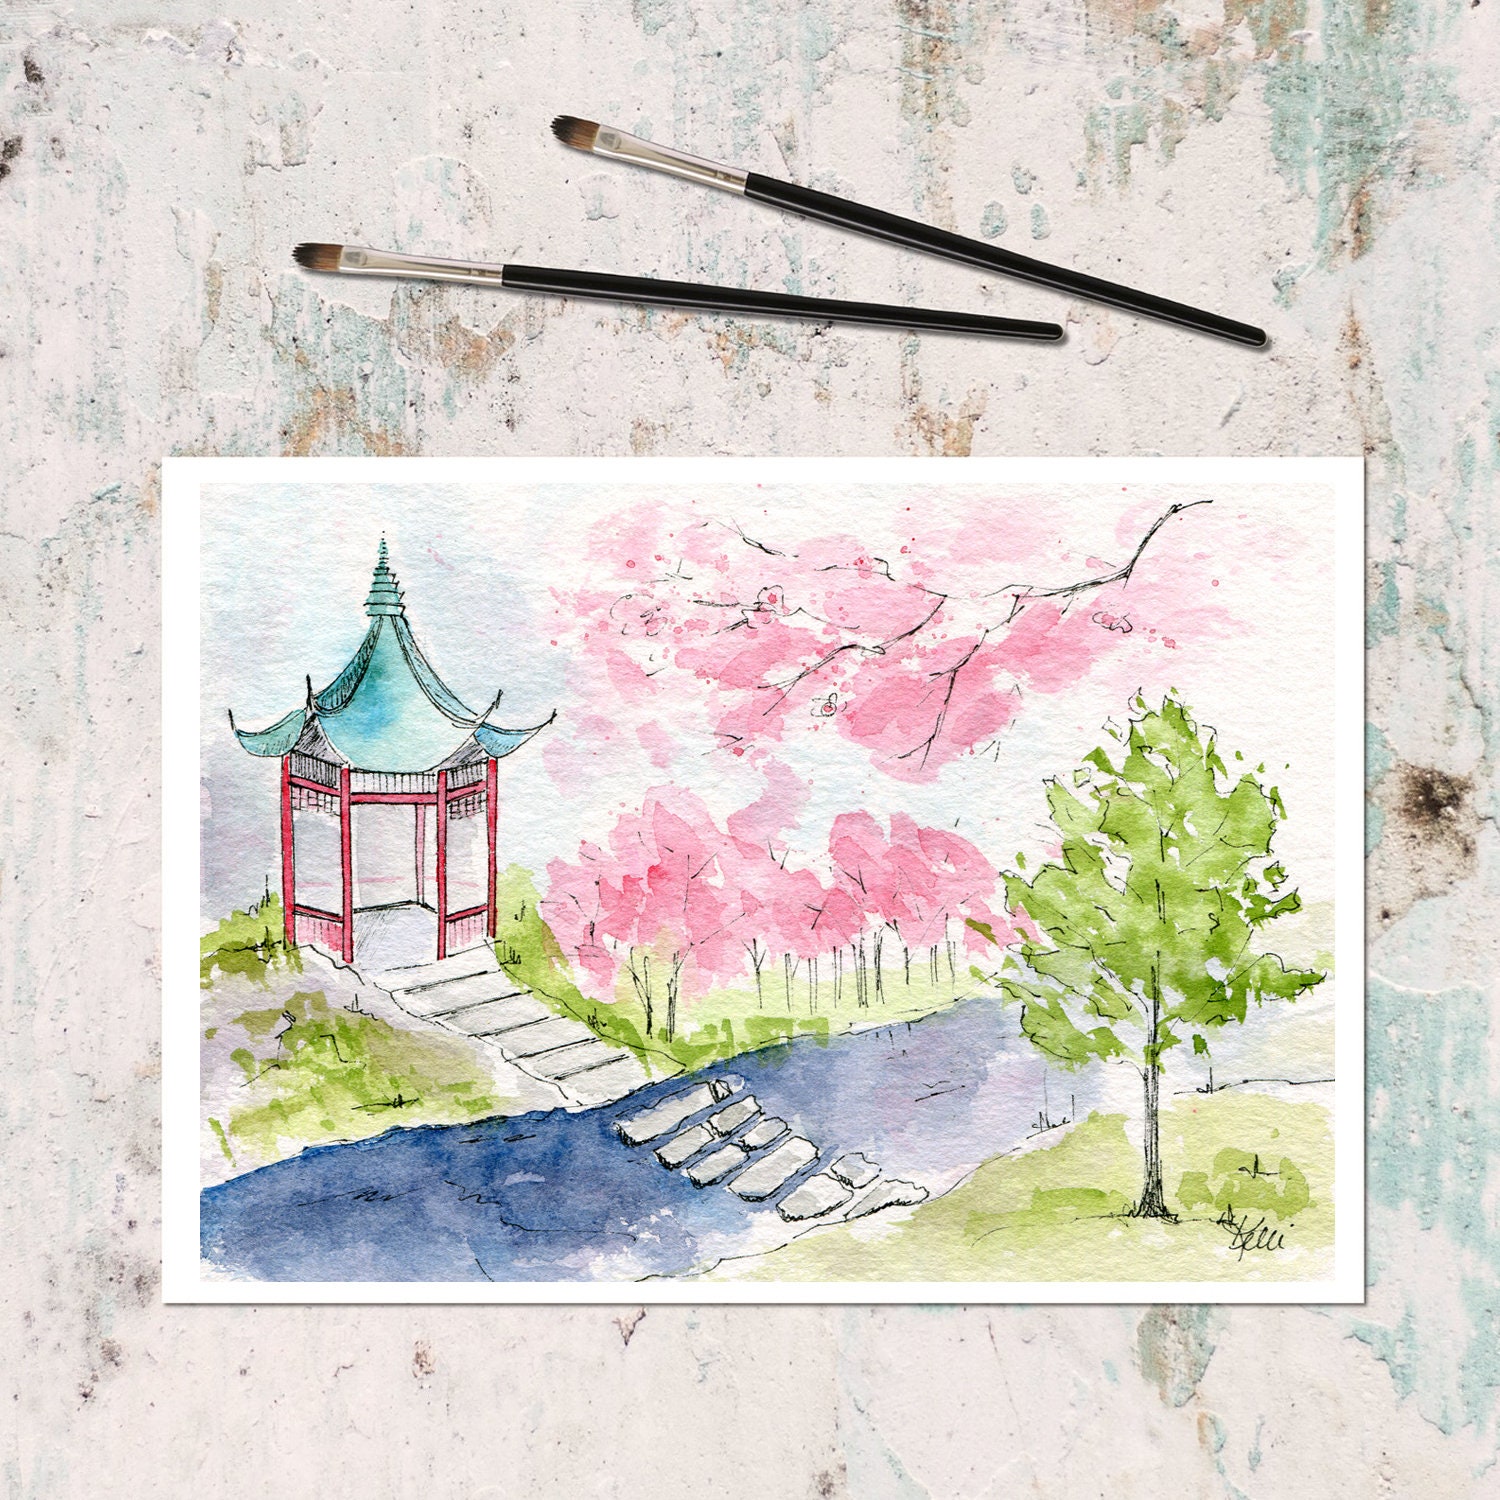 Japanese Garden Original Watercolor and Ink Landscape Painting